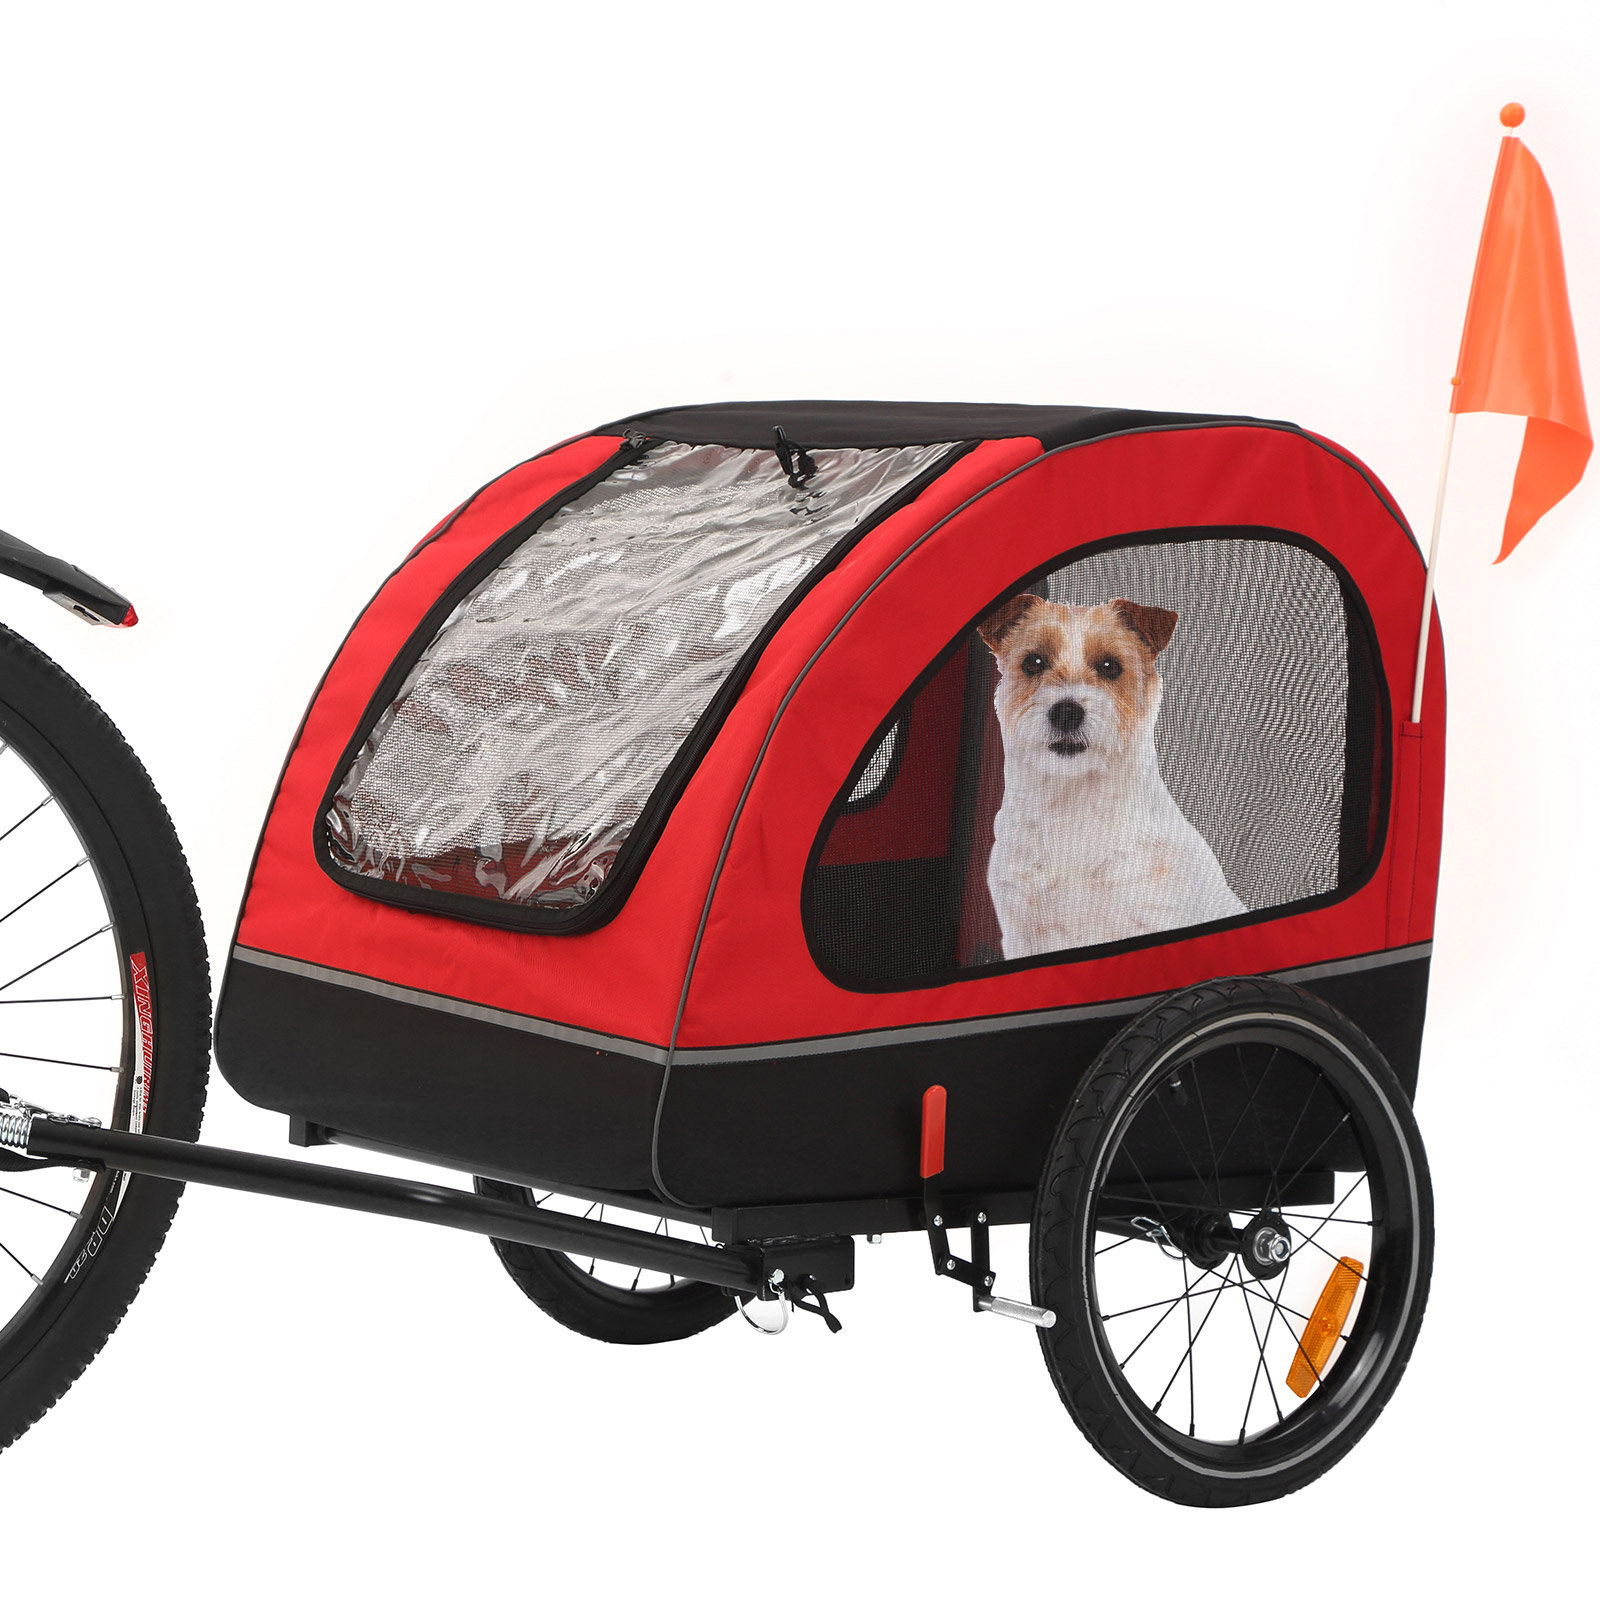 MOJAY Dog Bike Trailer for Small and Medium Pets Under 88 lbs, Red, Size: 51.1